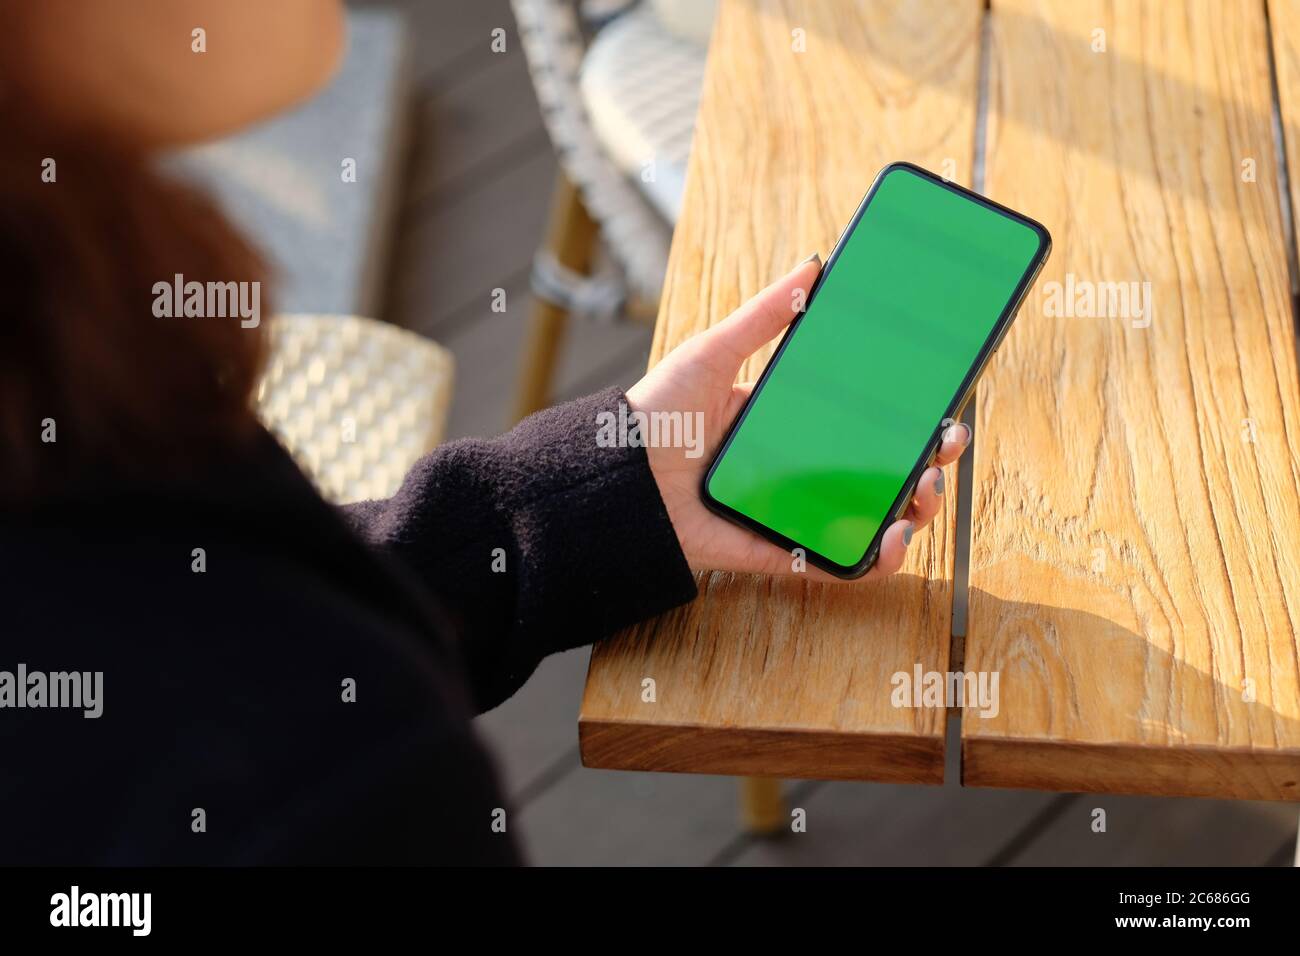 over shoulder of one woman holding green screen phone on wooden table under sunshine. blur background Stock Photo